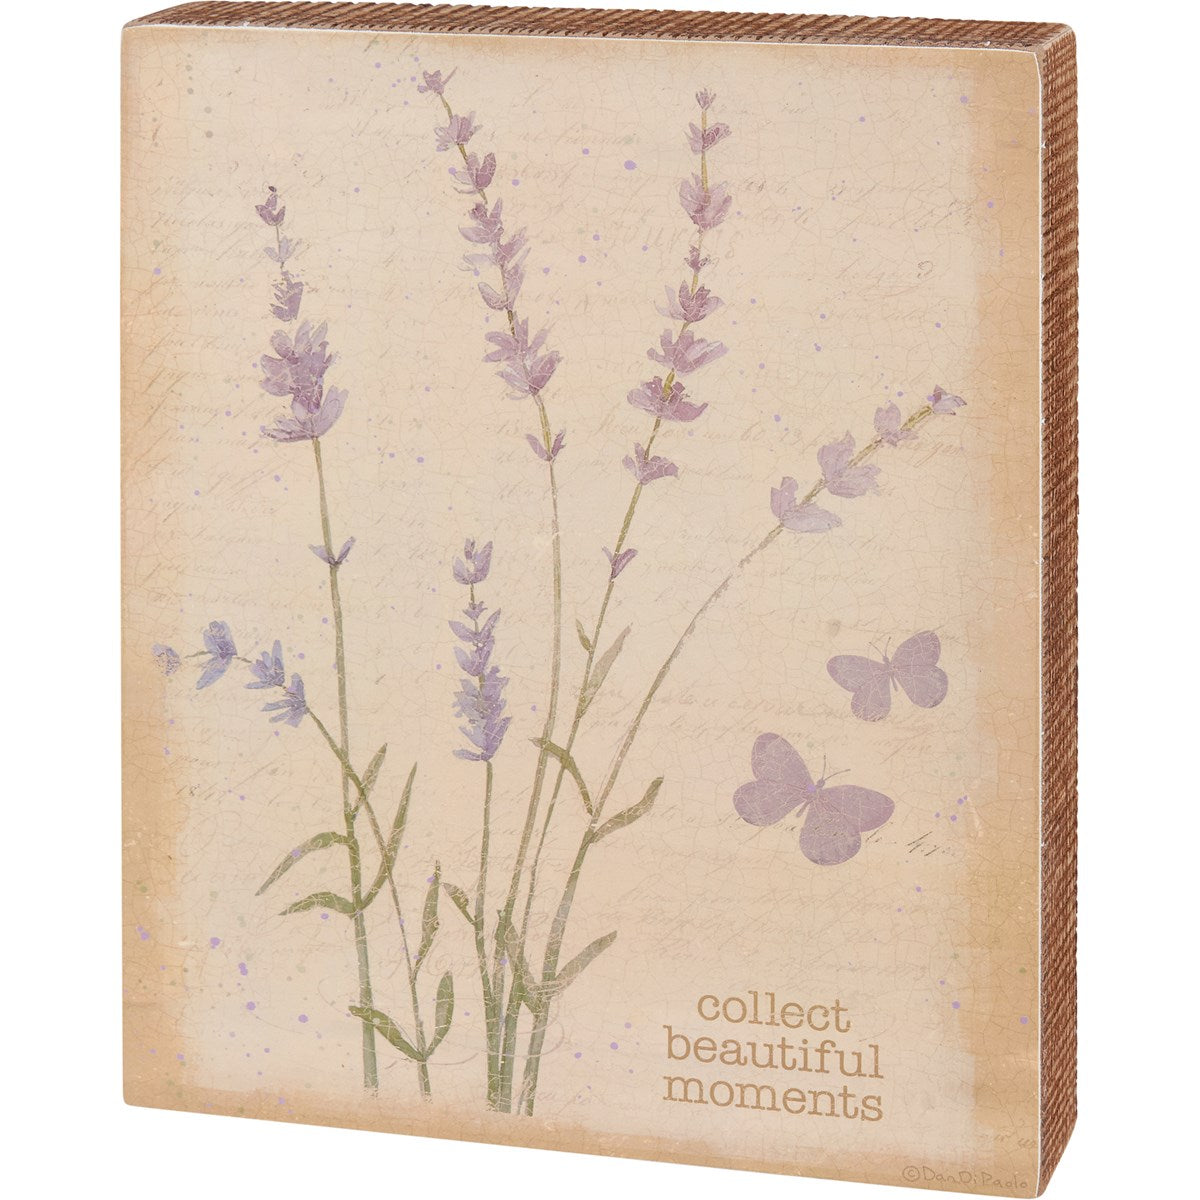 Collect Beautiful Moments 10" Wooden Box Sign